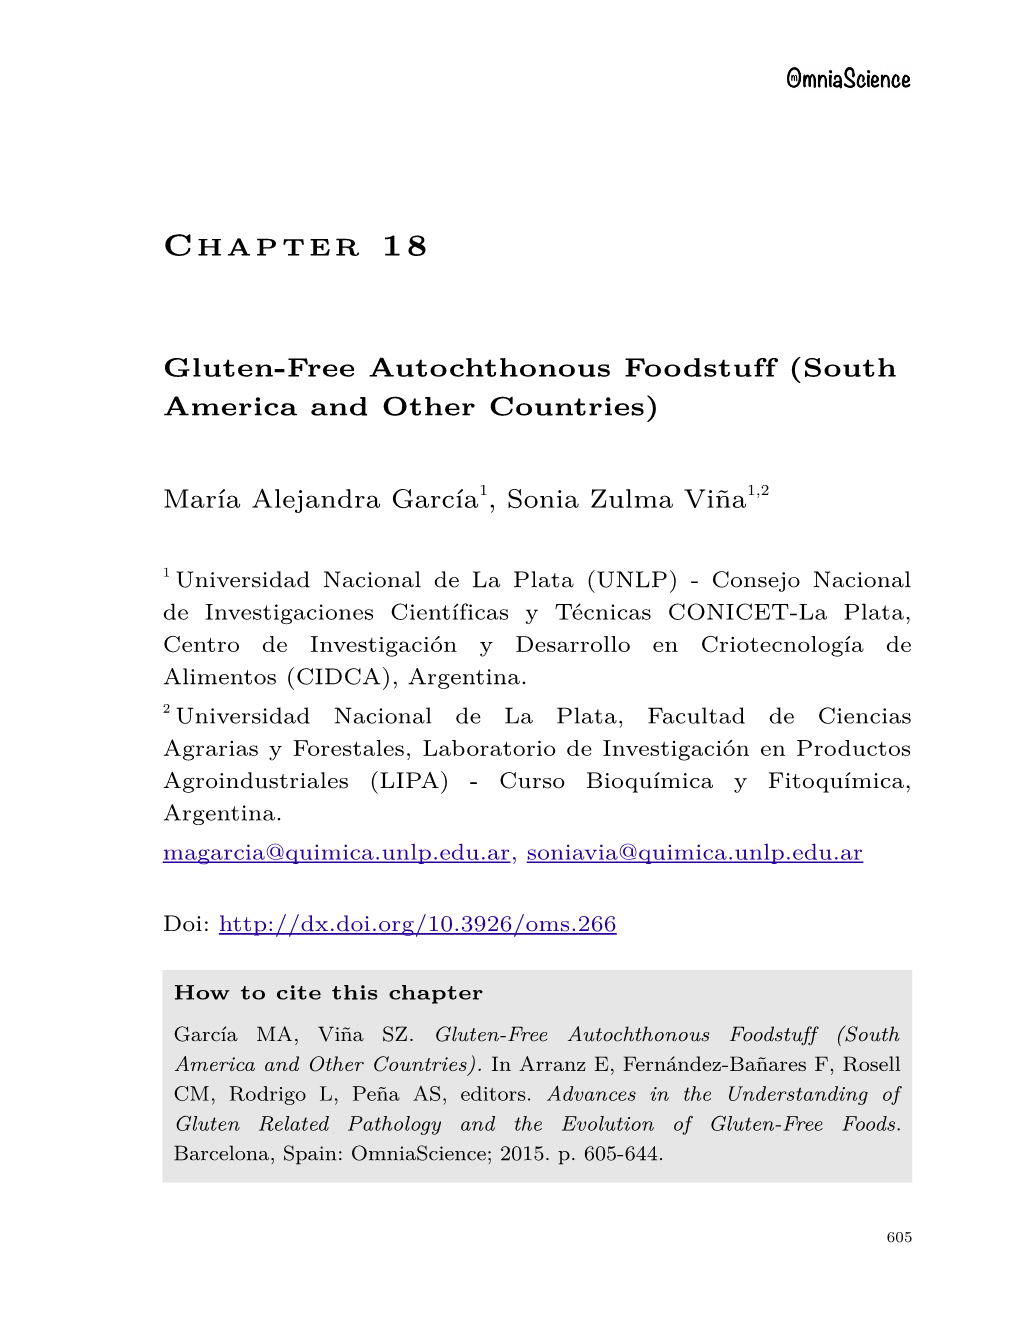 Gluten-Free Autochthonous Foodstuff (South America and Other Countries)